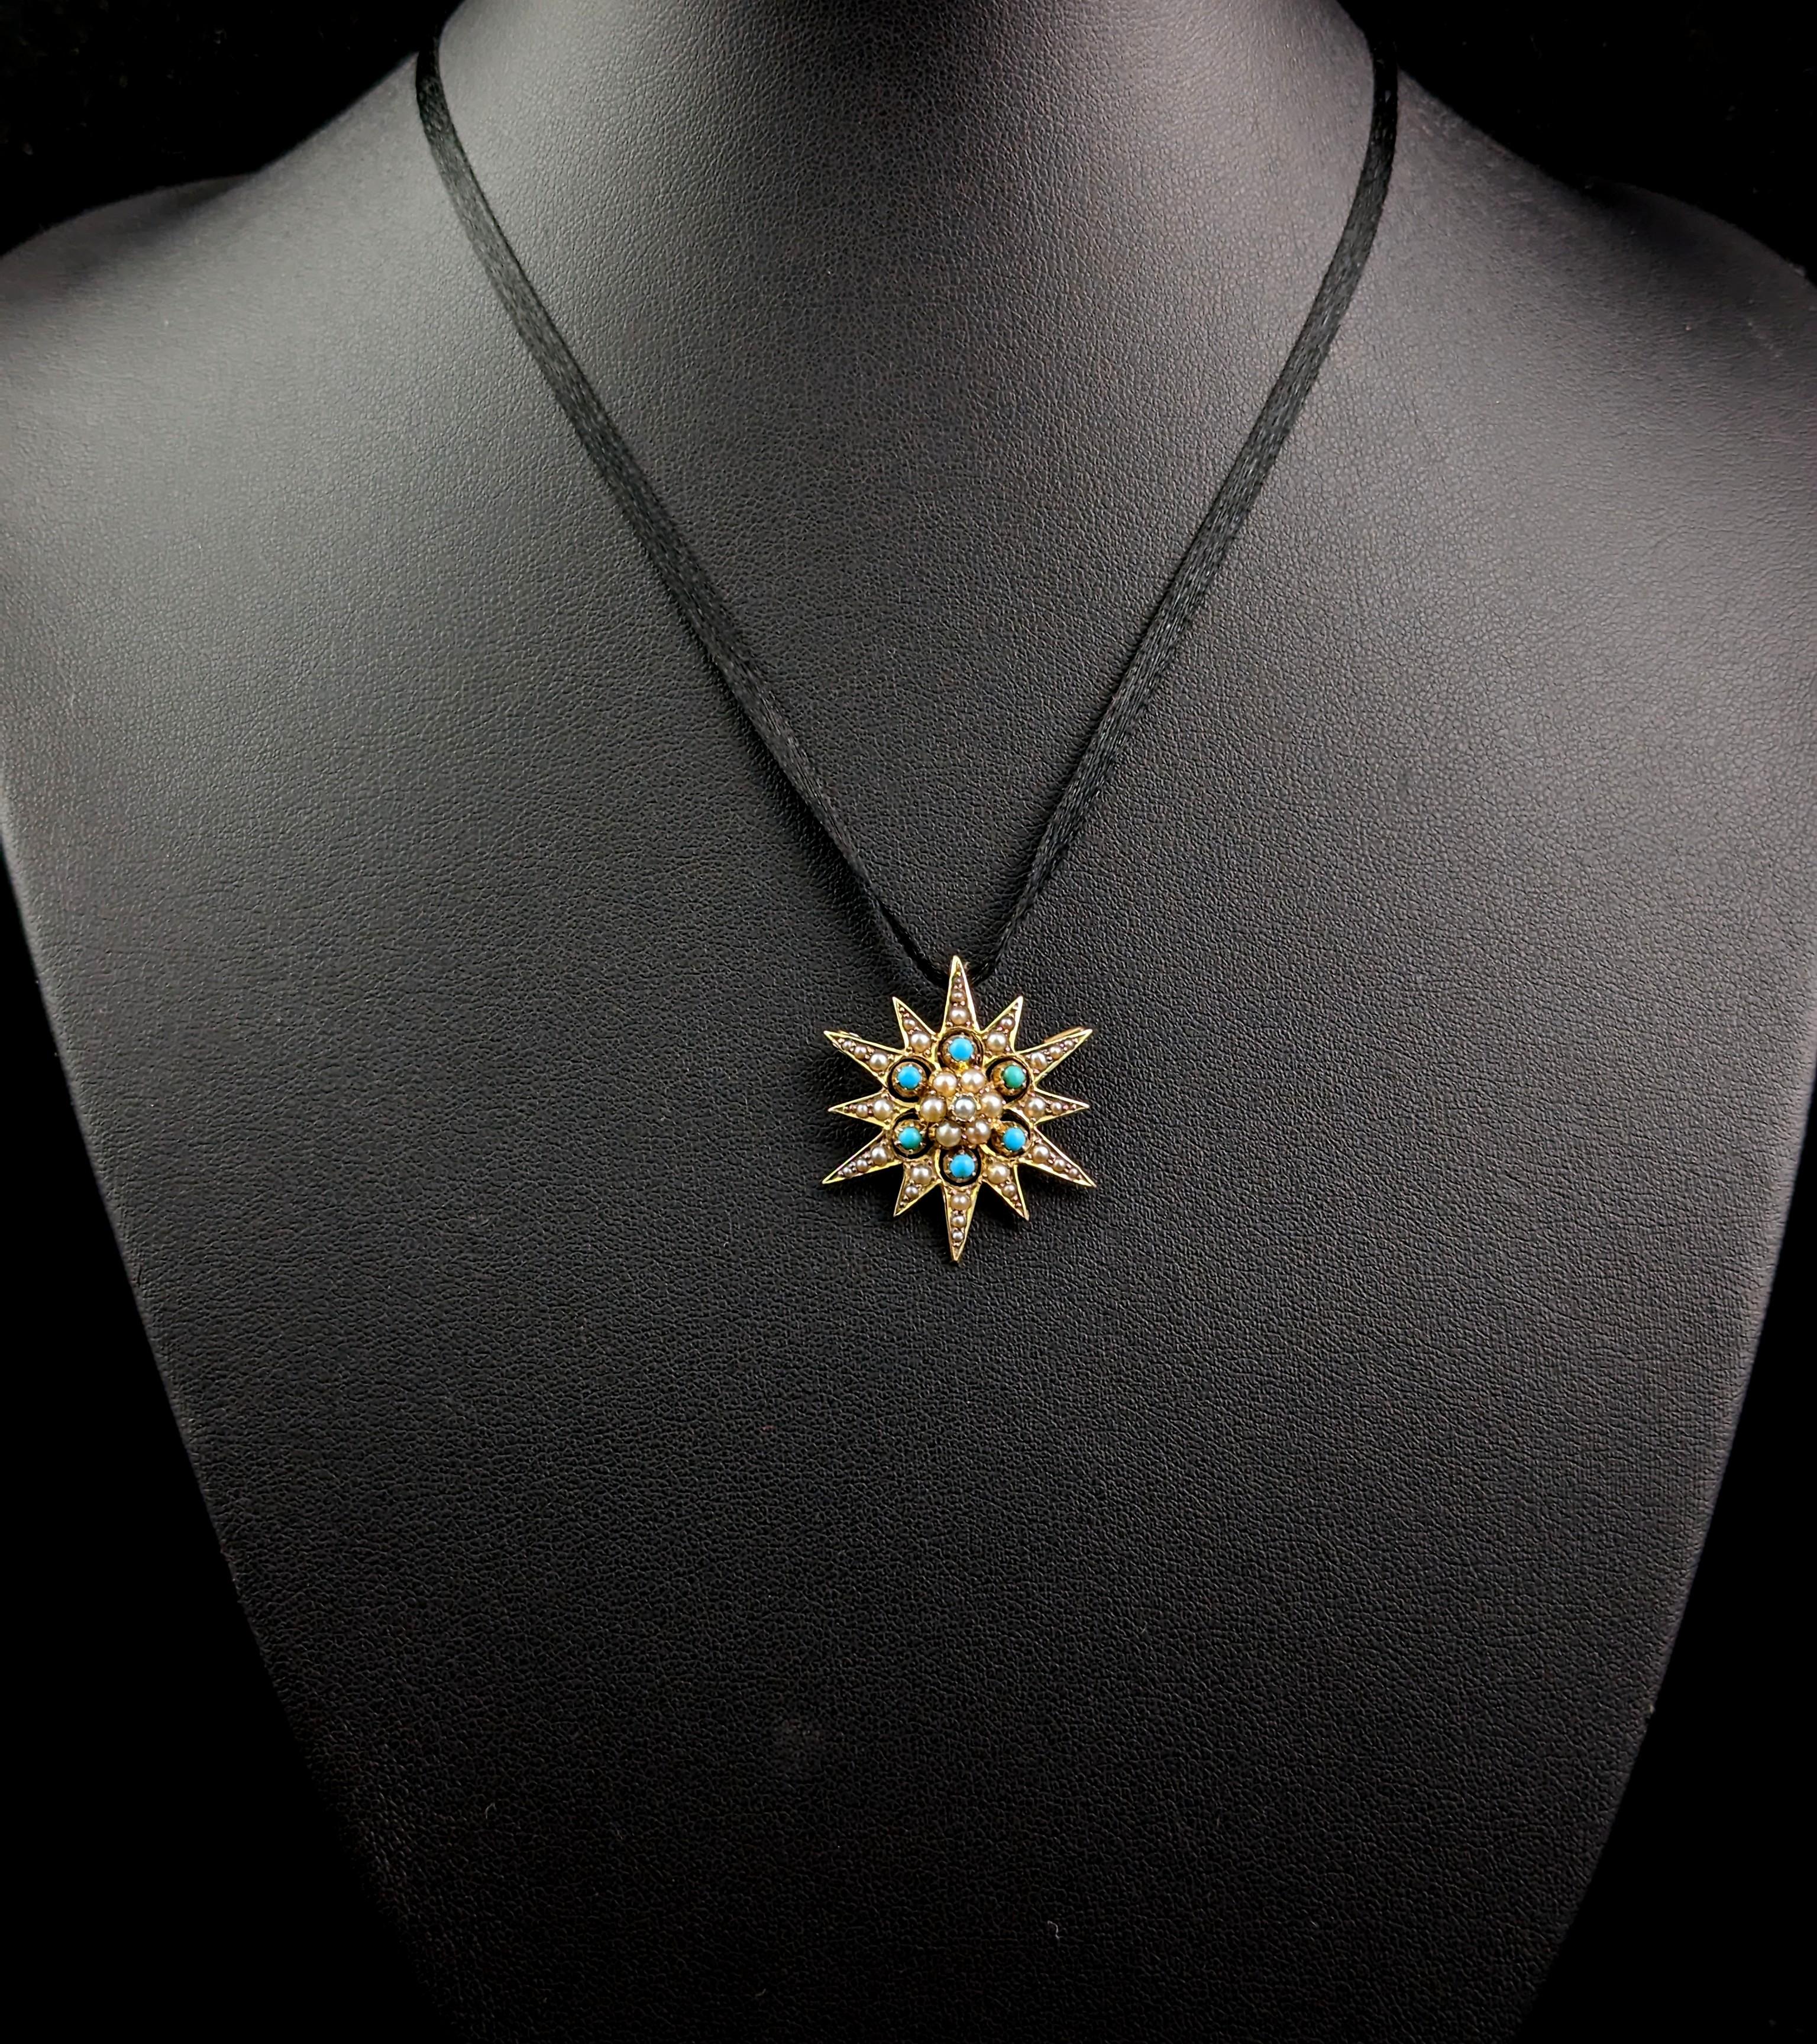 This antique Turquoise and Pearl star pendant brooch is truly a magnificent piece of Late Victorian jewellery.

Stars and celestial jewels have a timeless allure that just keeps on going and they are as wearable today as they were then.

This